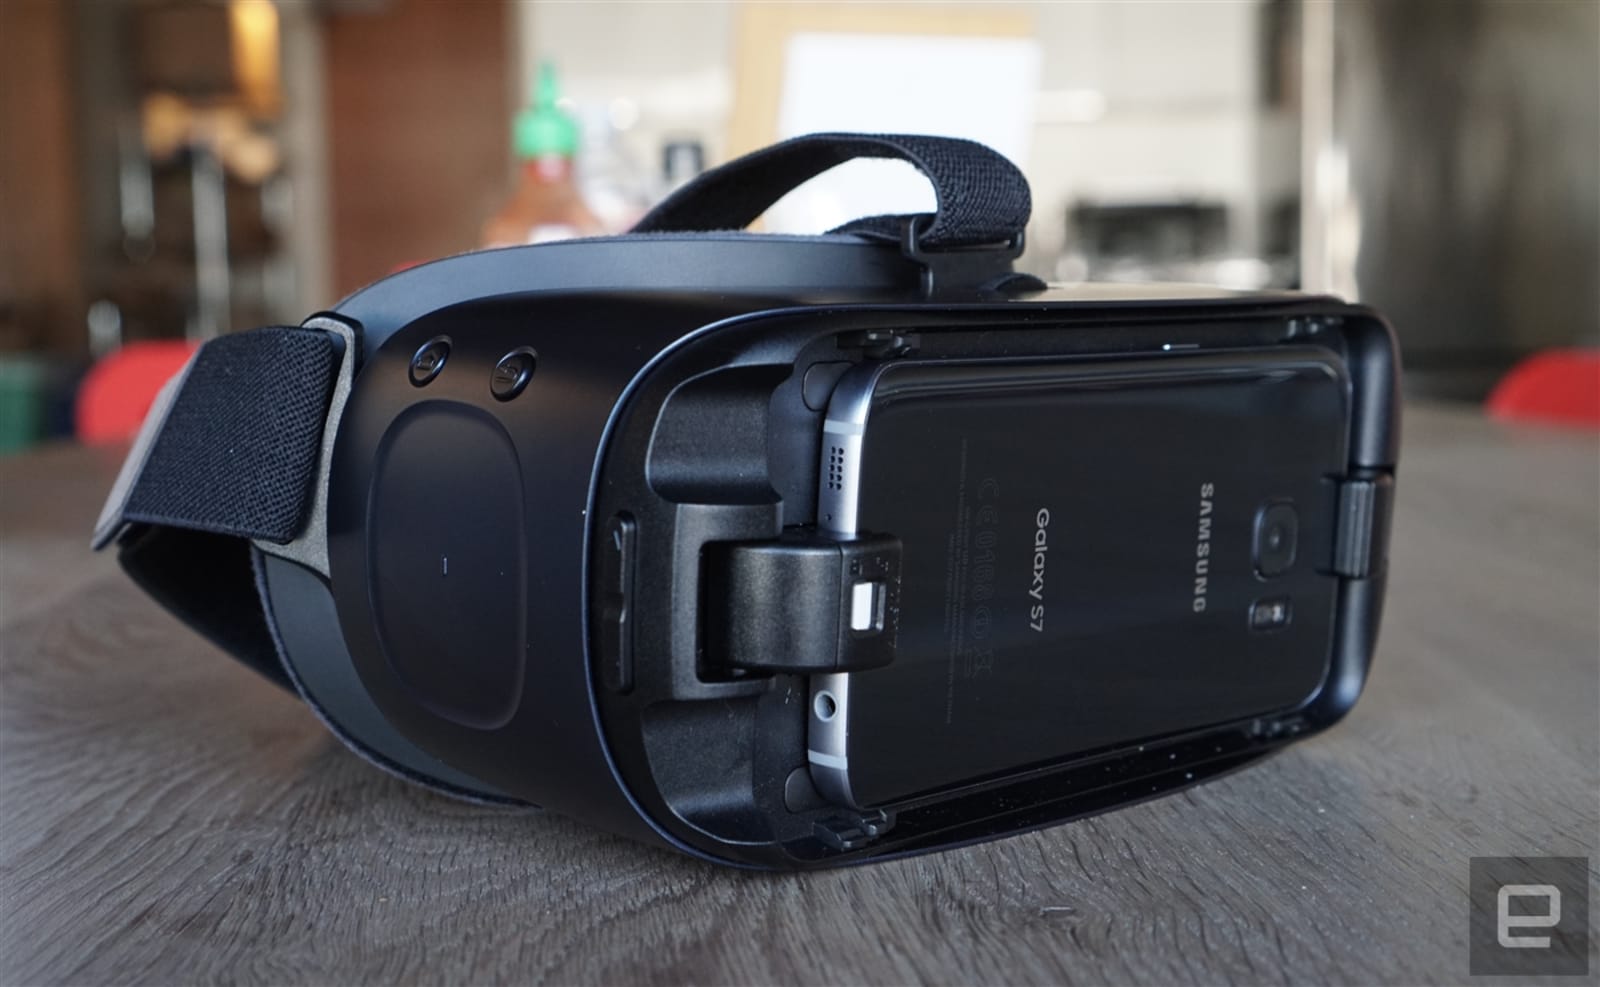 Samsung's new Gear VR is its most comfortable and immersive yet